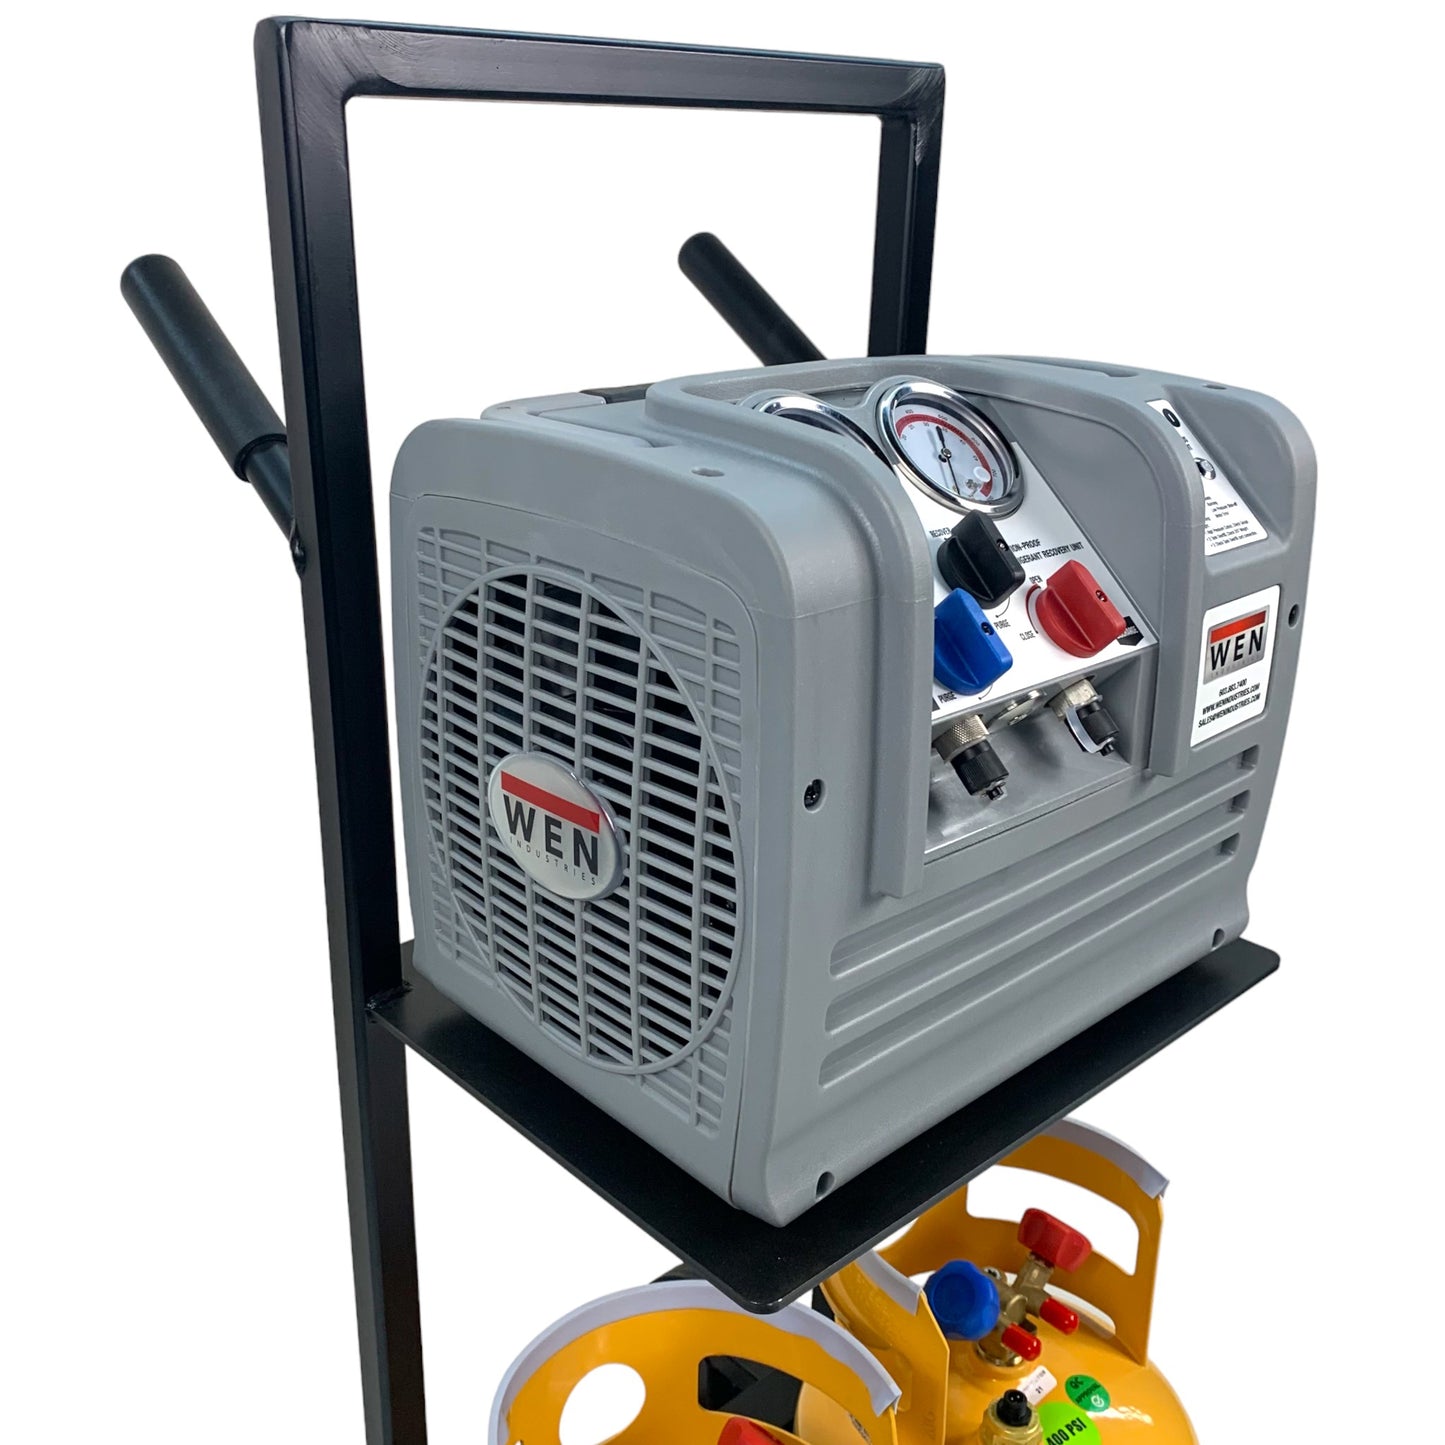 EV400 Cart R-134a WEN 1.33 HP, 2 Cylinder, Ignition-Proof Refrigerant Recovery Machine